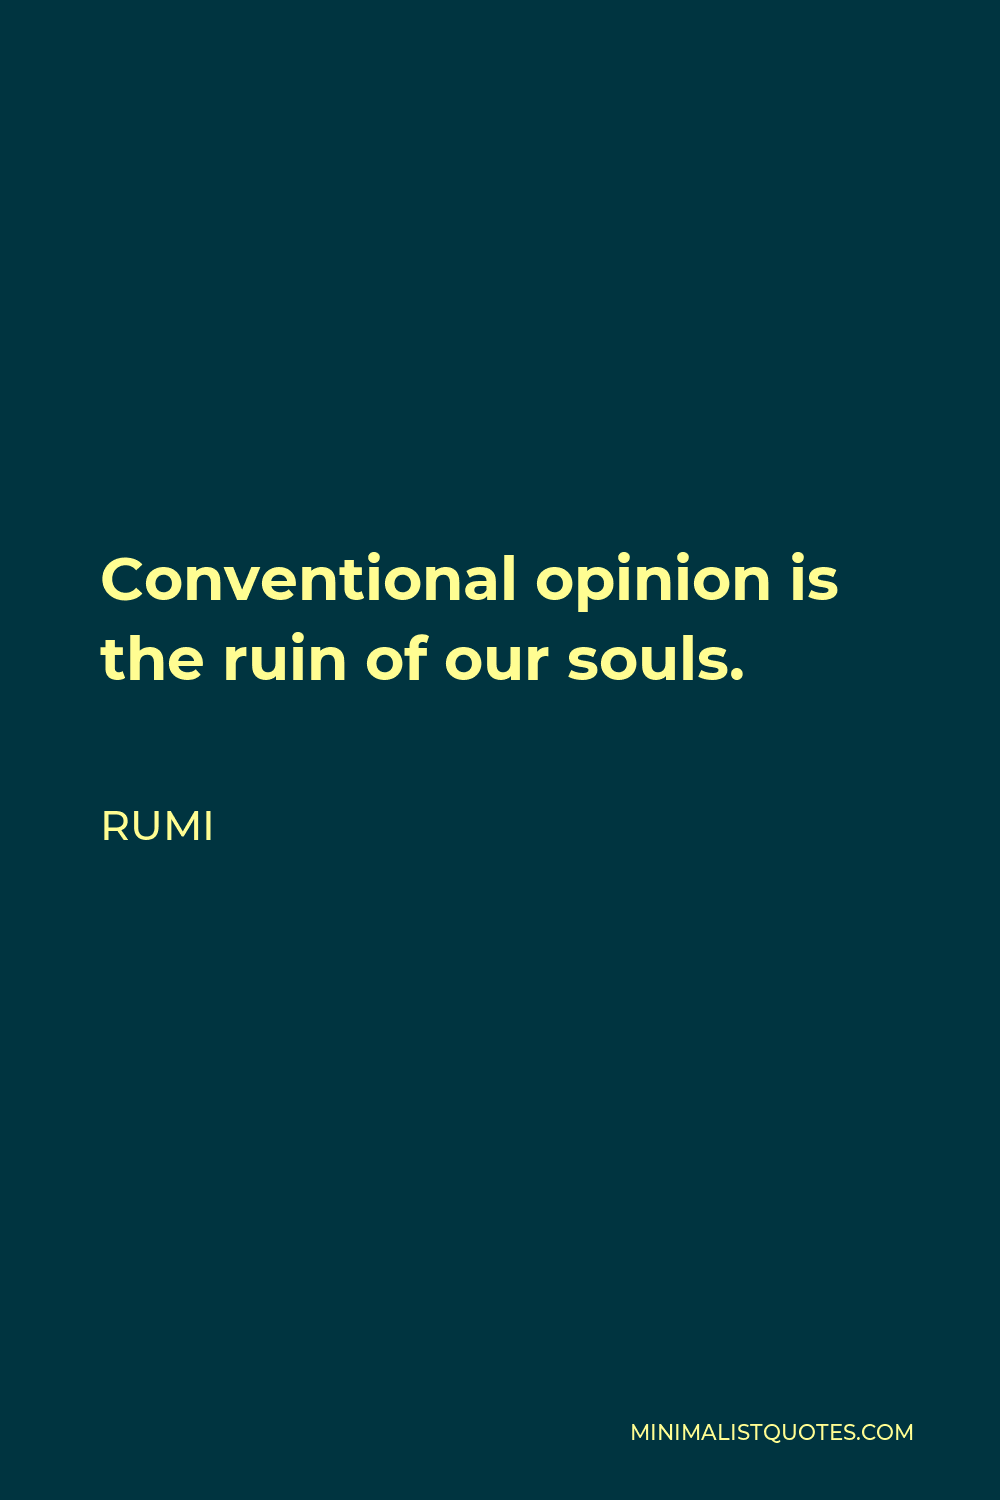 Rumi Quote - Conventional opinion is the ruin of our souls.